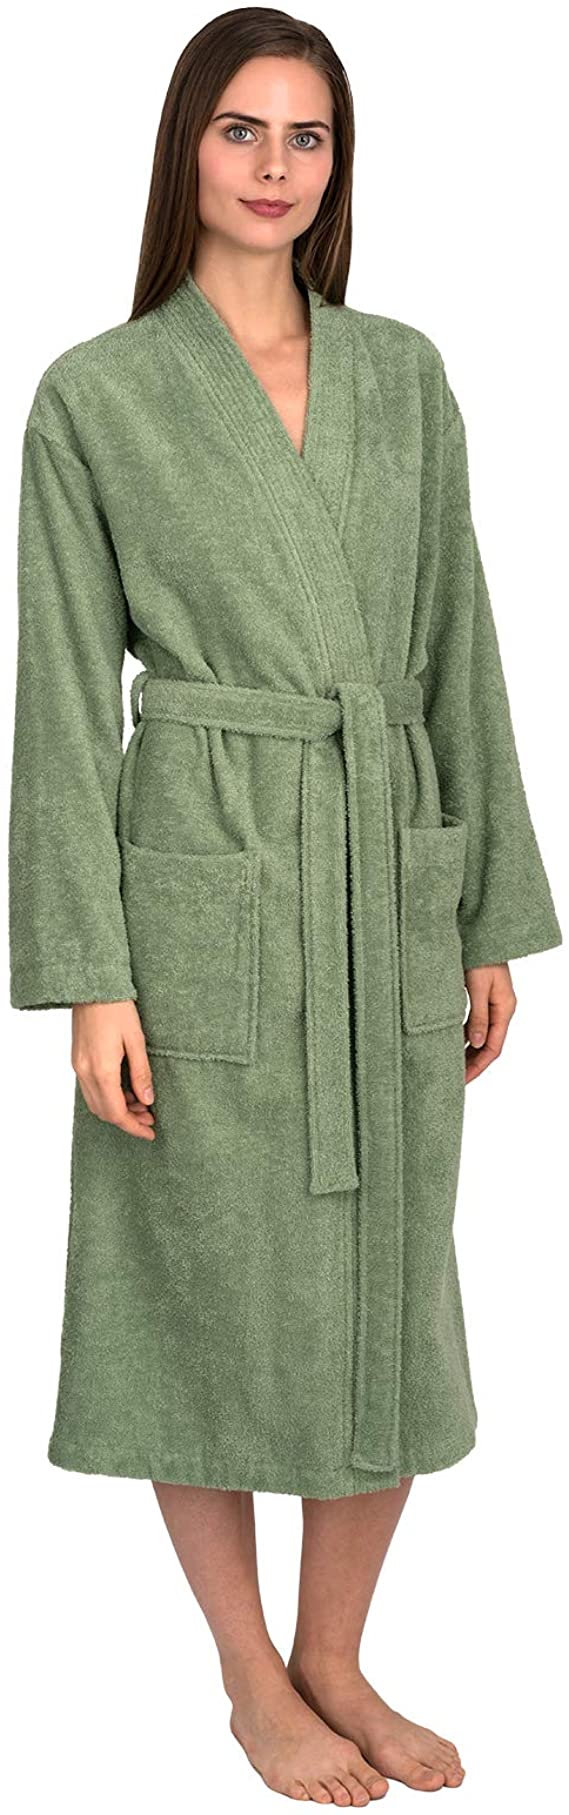 TowelSelections Turkish Cotton Terry Cloth Robe